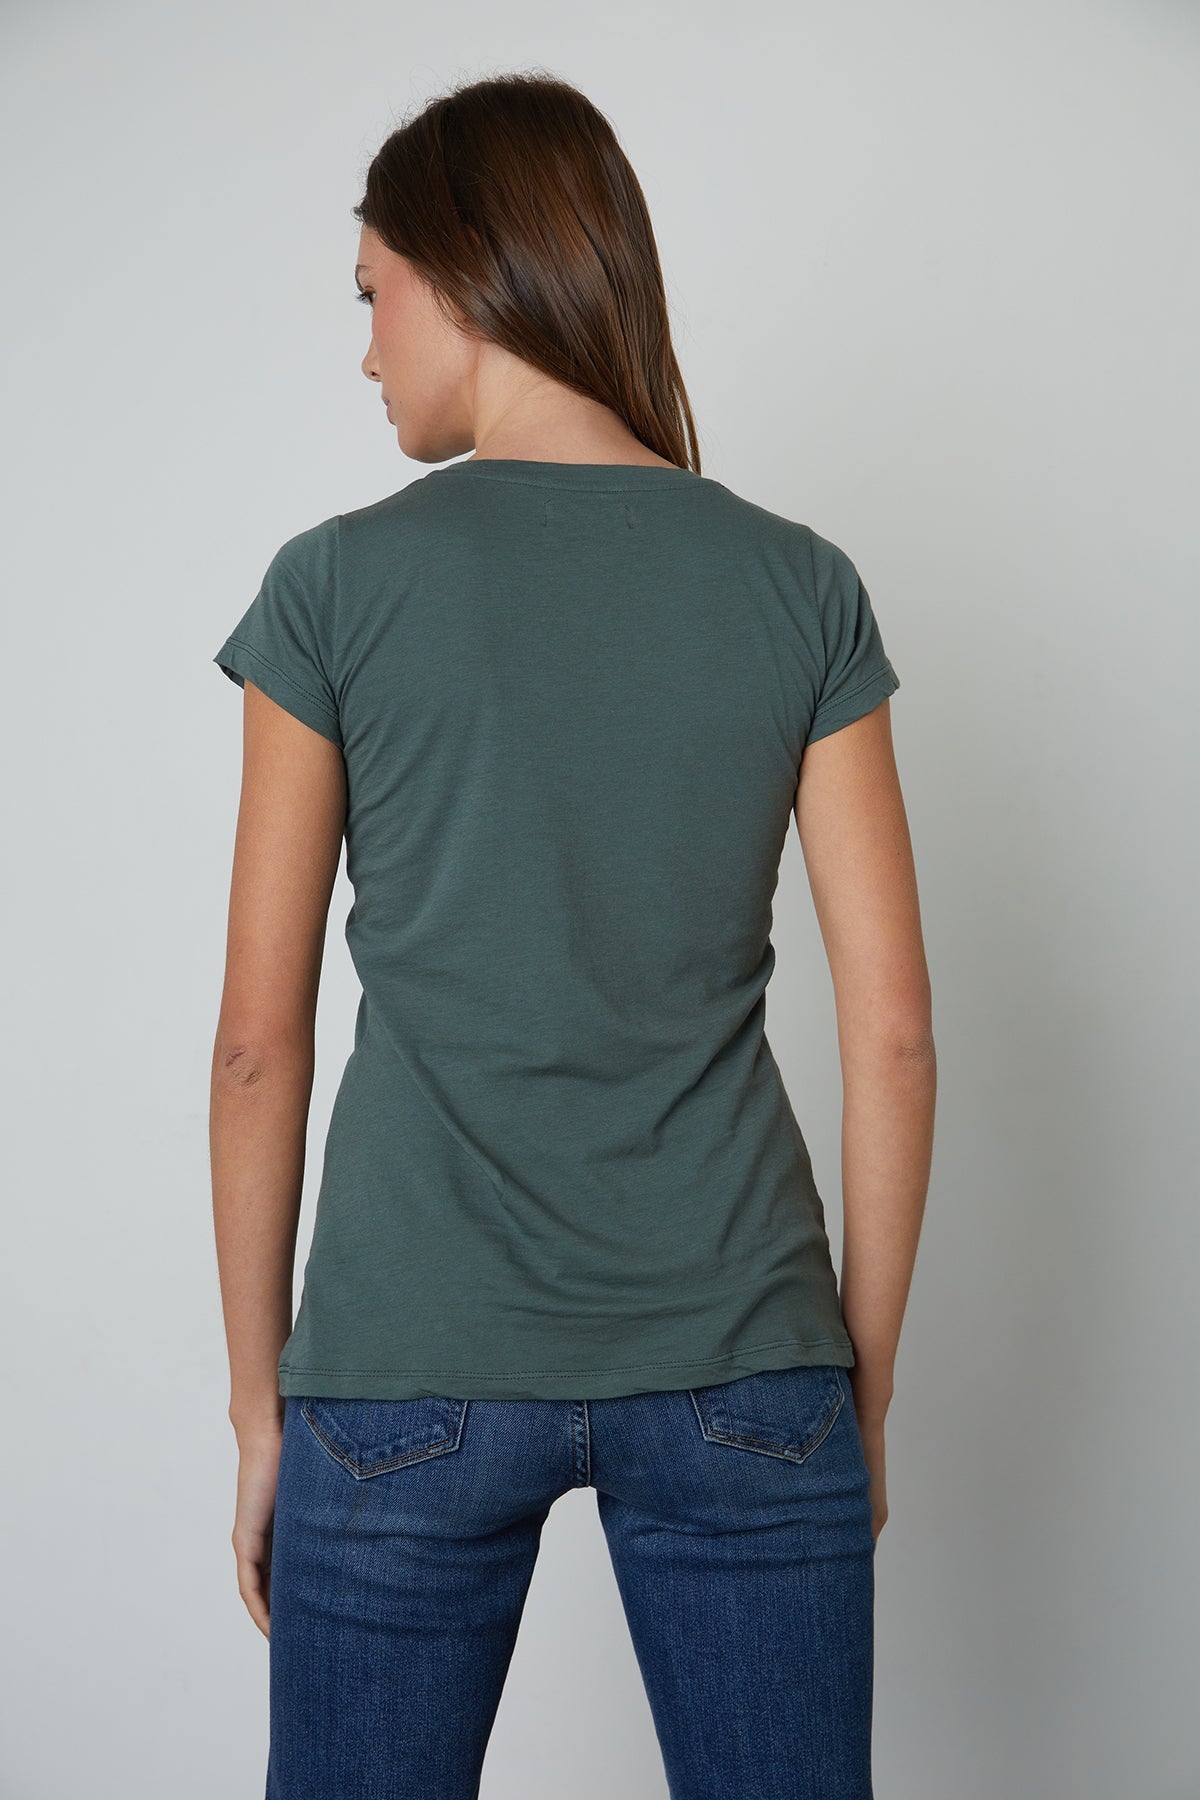 the back view of a woman wearing jeans and a Velvet by Graham & Spencer JEMMA GAUZY WHISPER FITTED CREW NECK TEE.-26630463193281